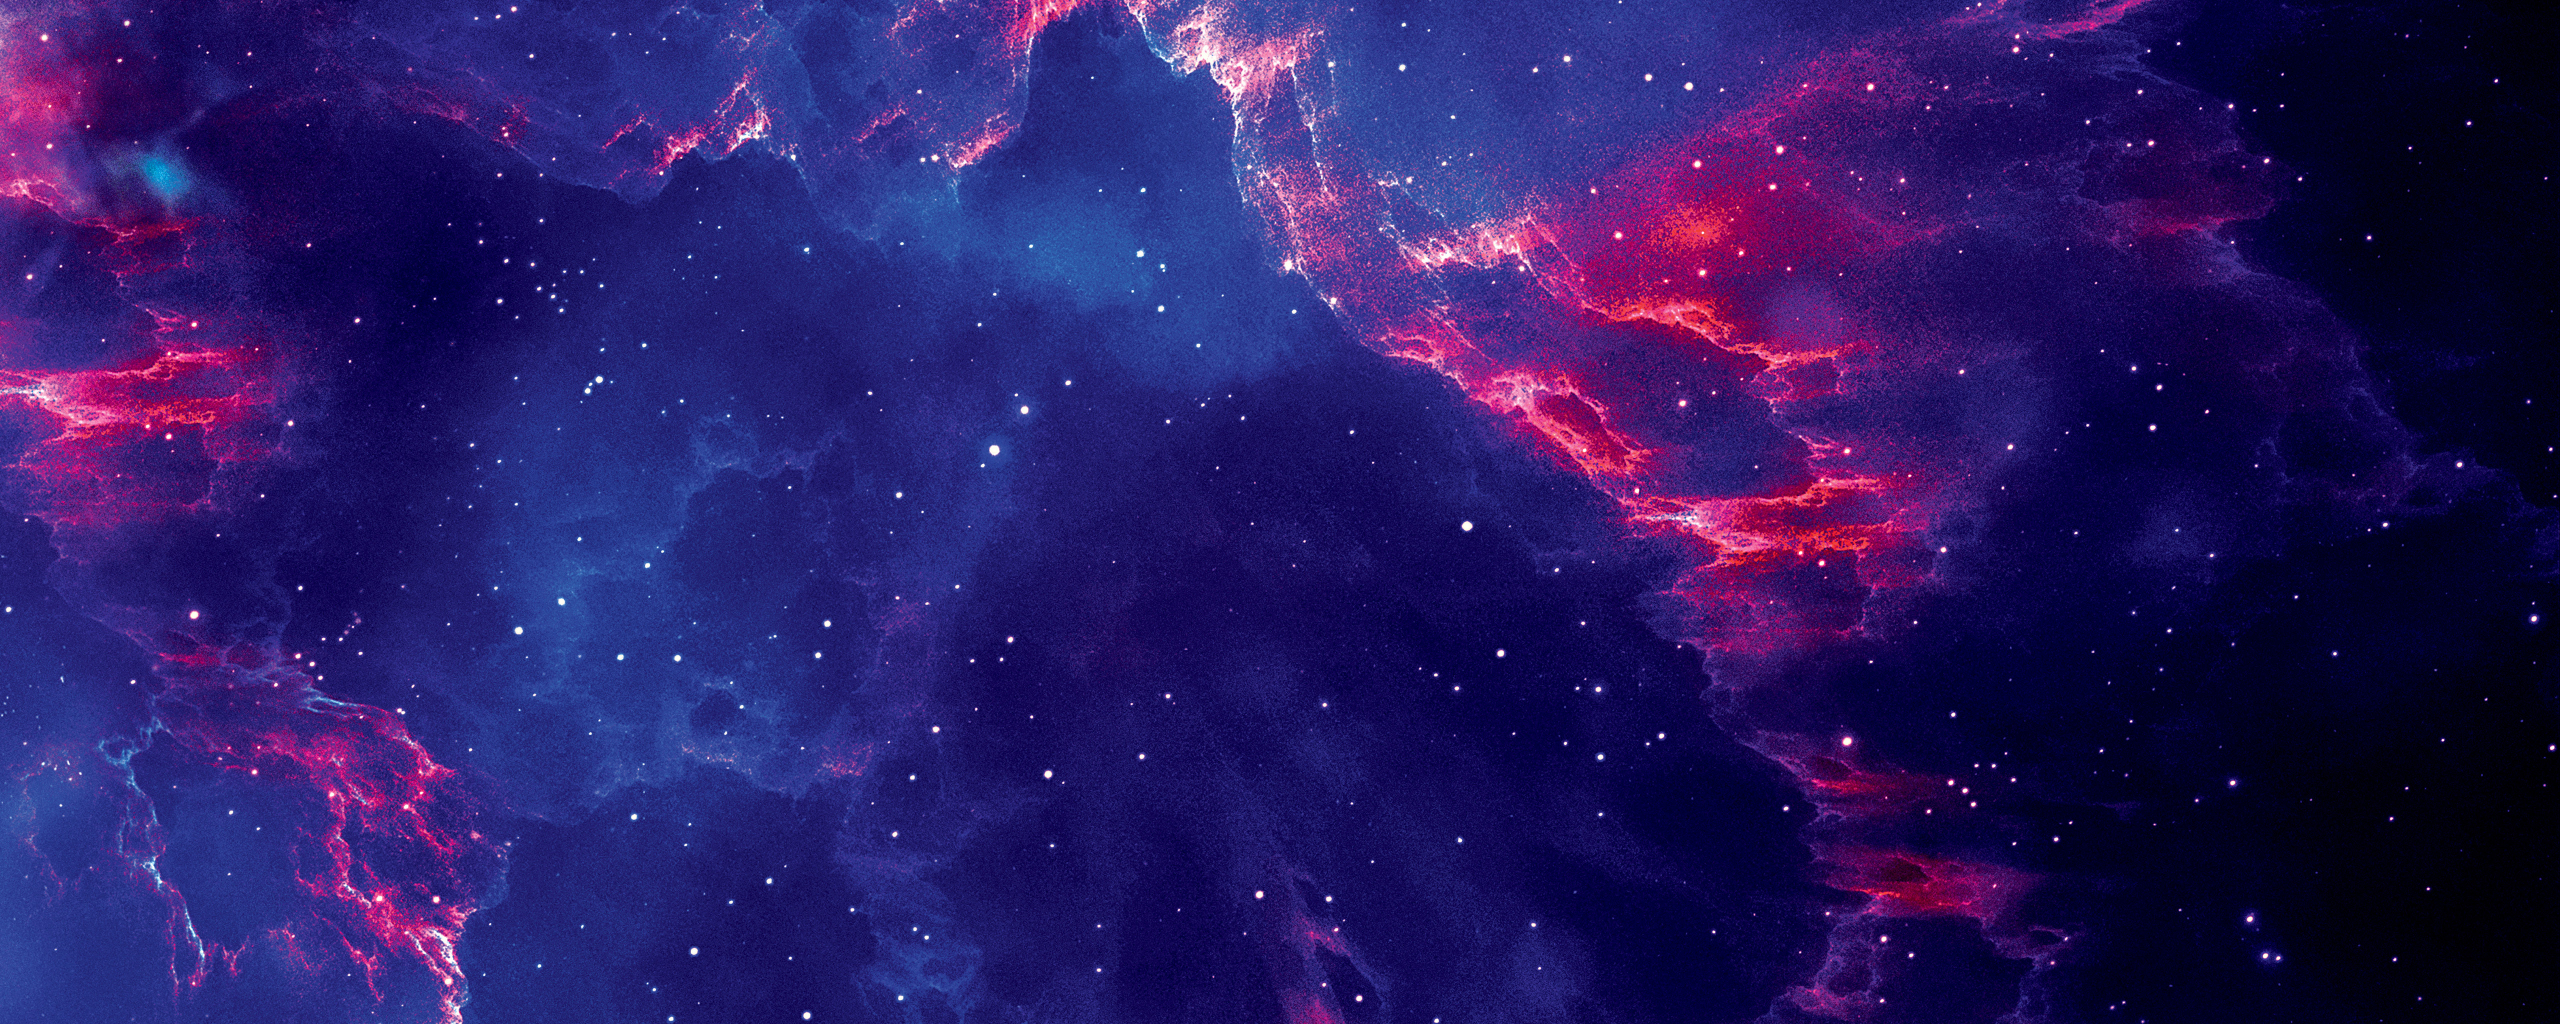 Download 2560x1024 Wallpaper Starry And Cloudy Cosmos Galaxy